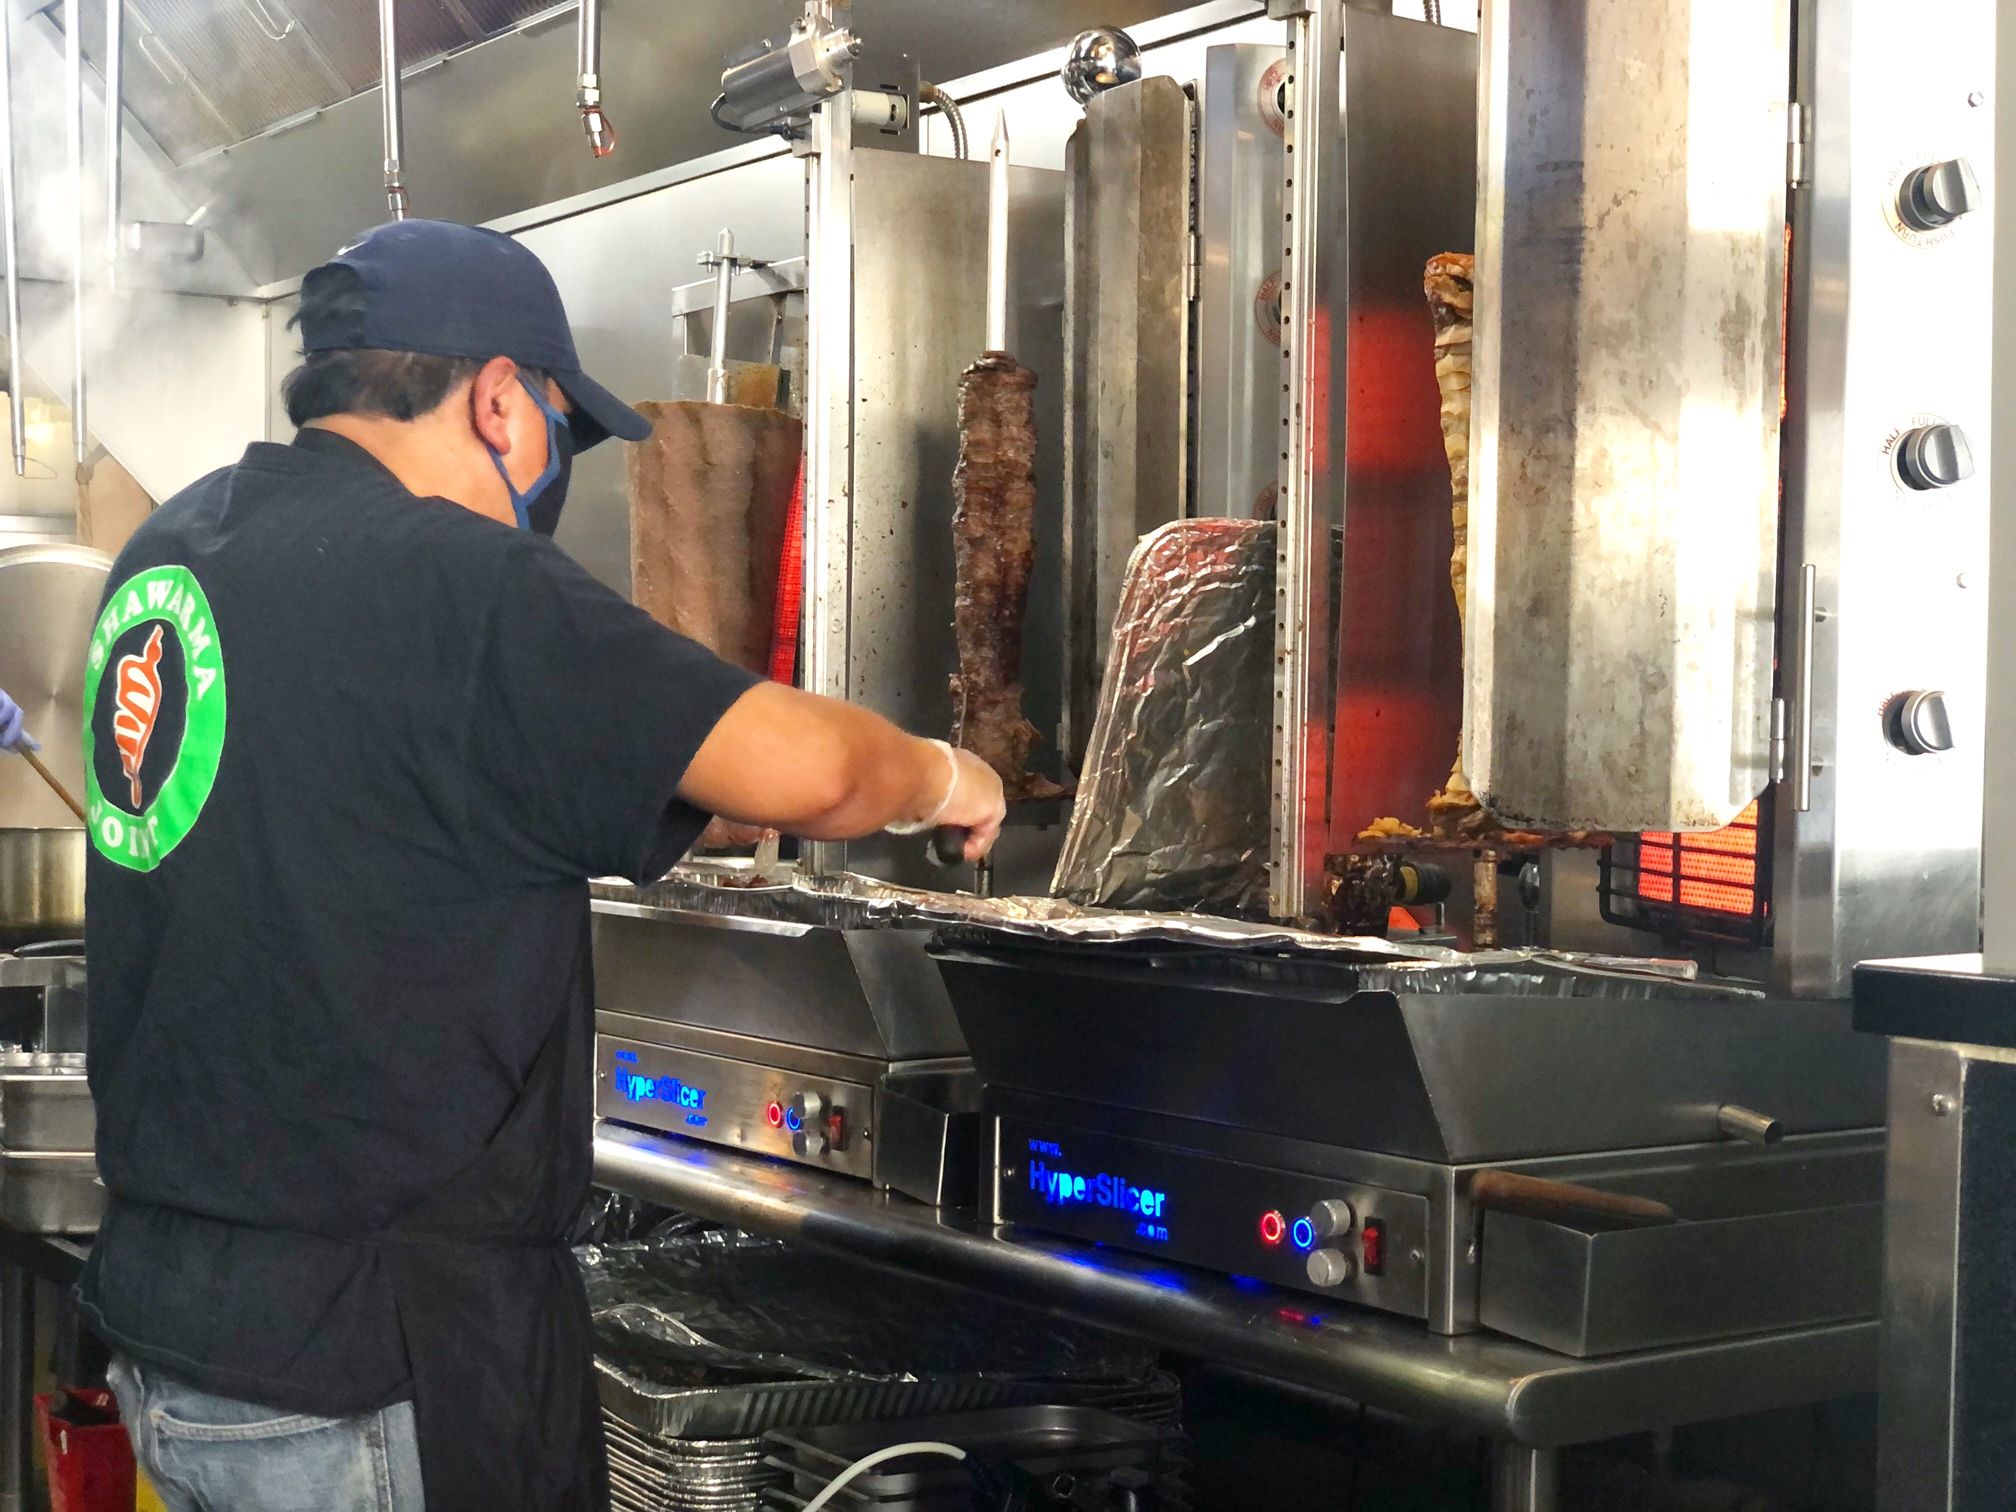 A staff person at Shawarma Joint slices lamb on a verticle rotisserie. Photo by Alyssa Buckley.